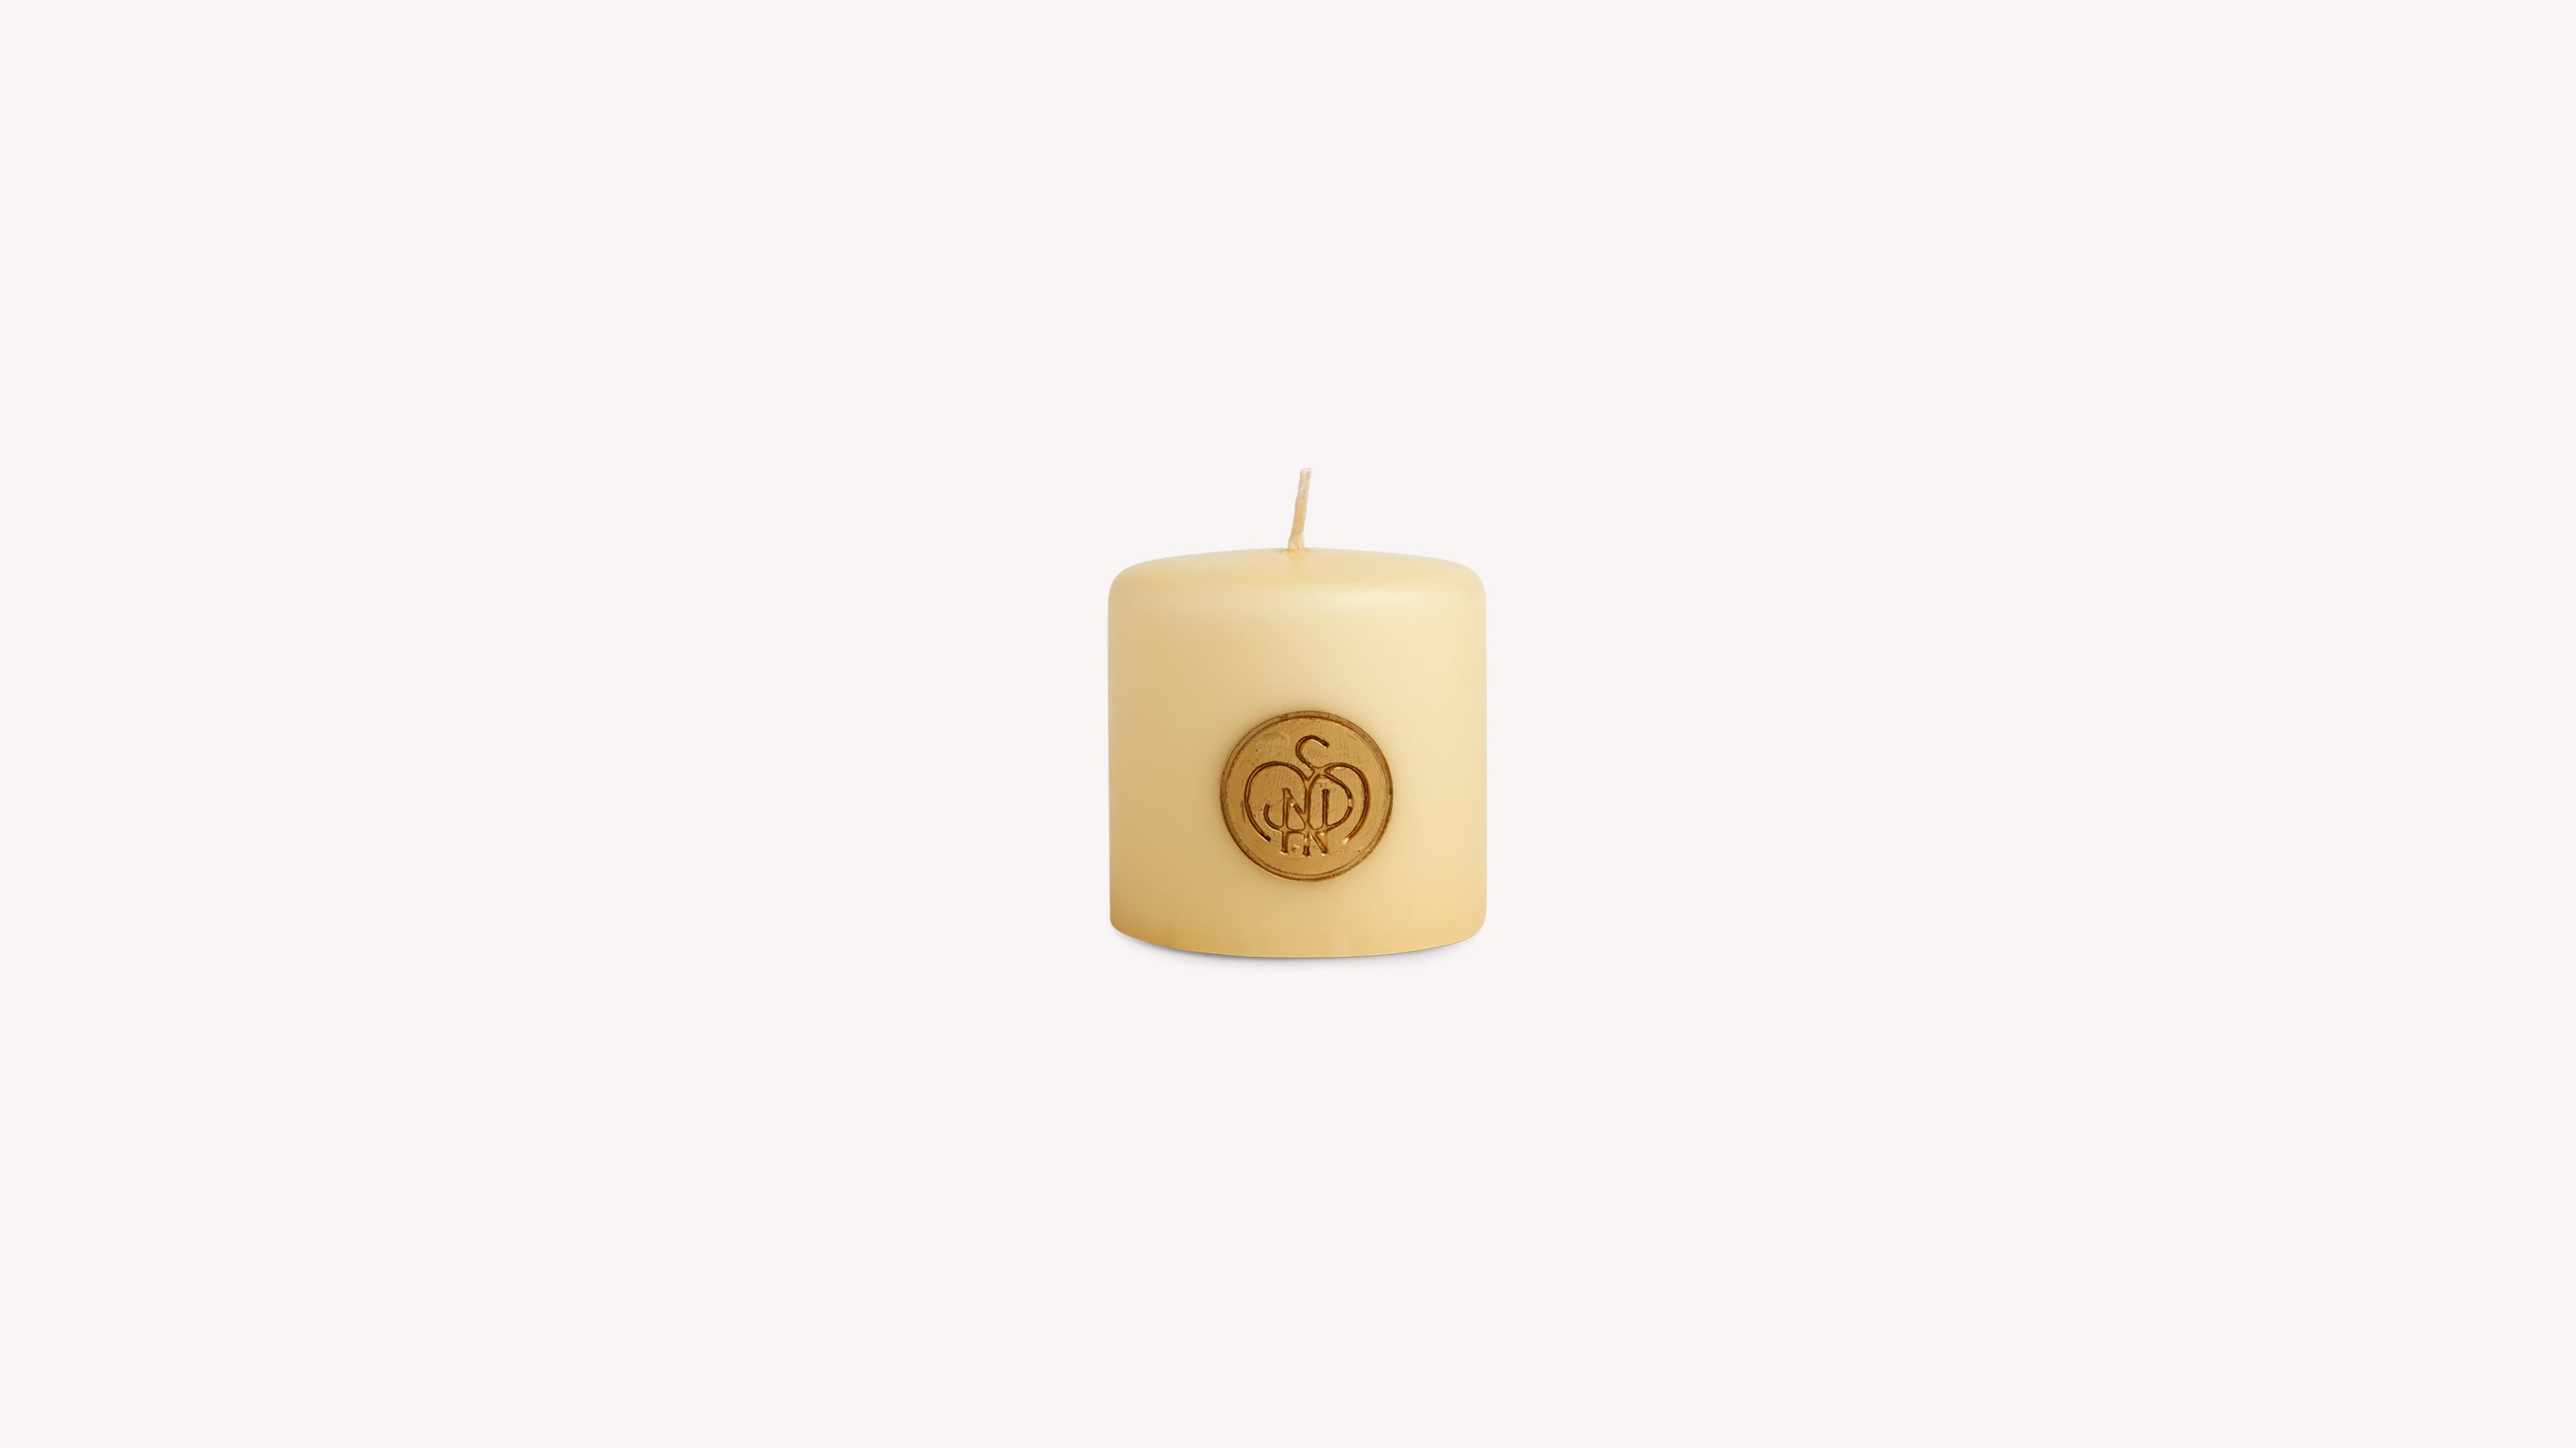 Vanilla Scented Candle